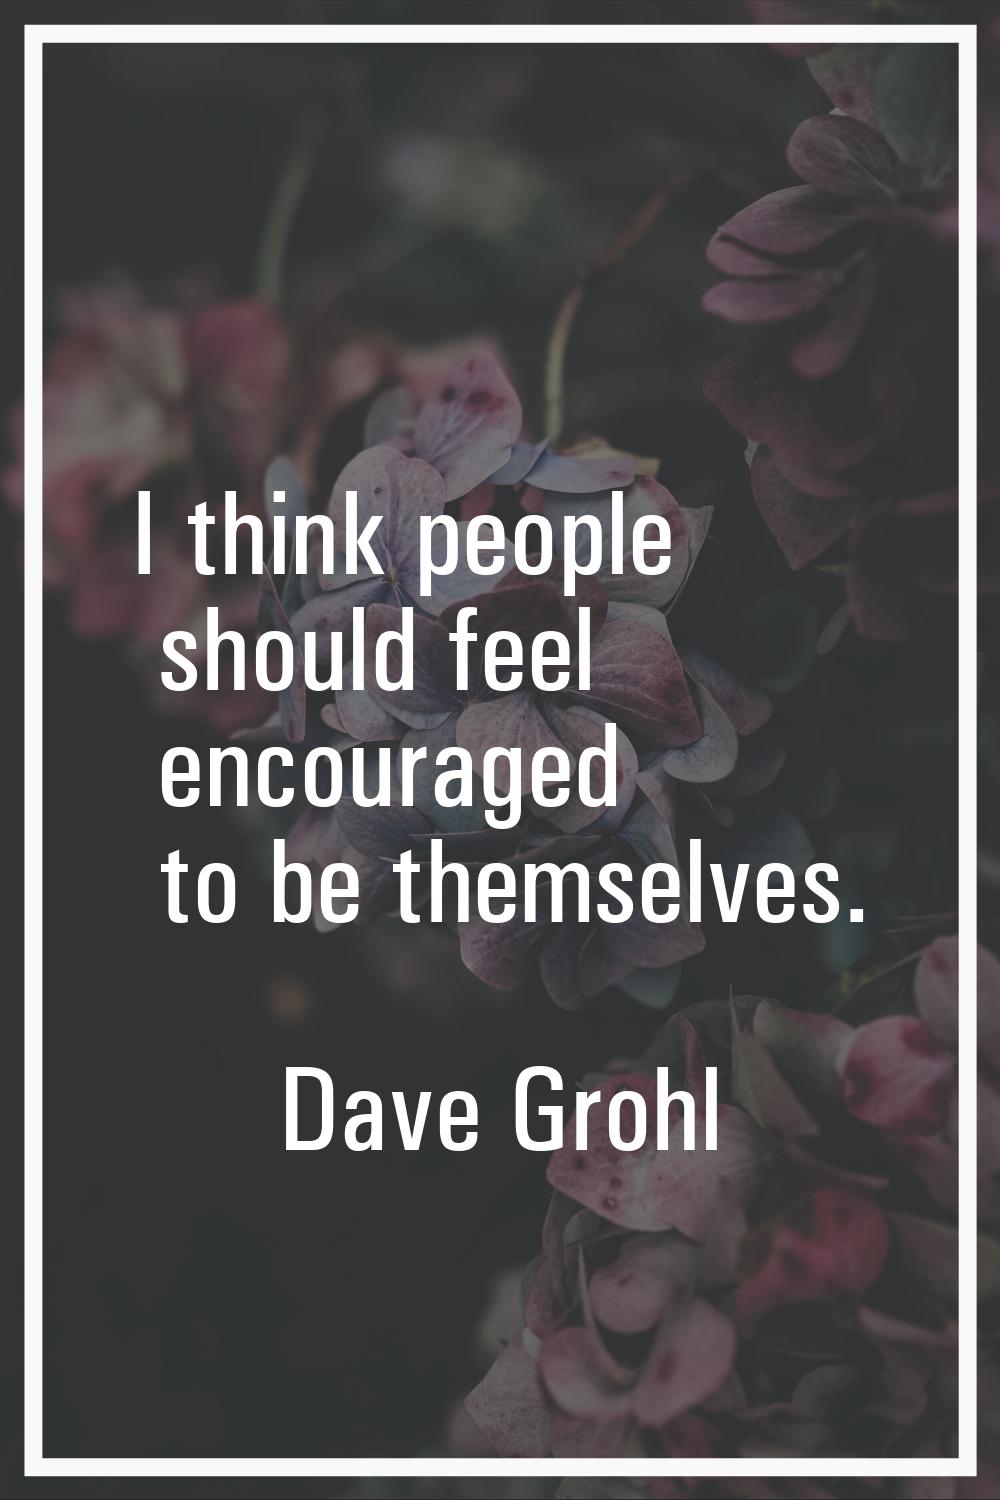 I think people should feel encouraged to be themselves.